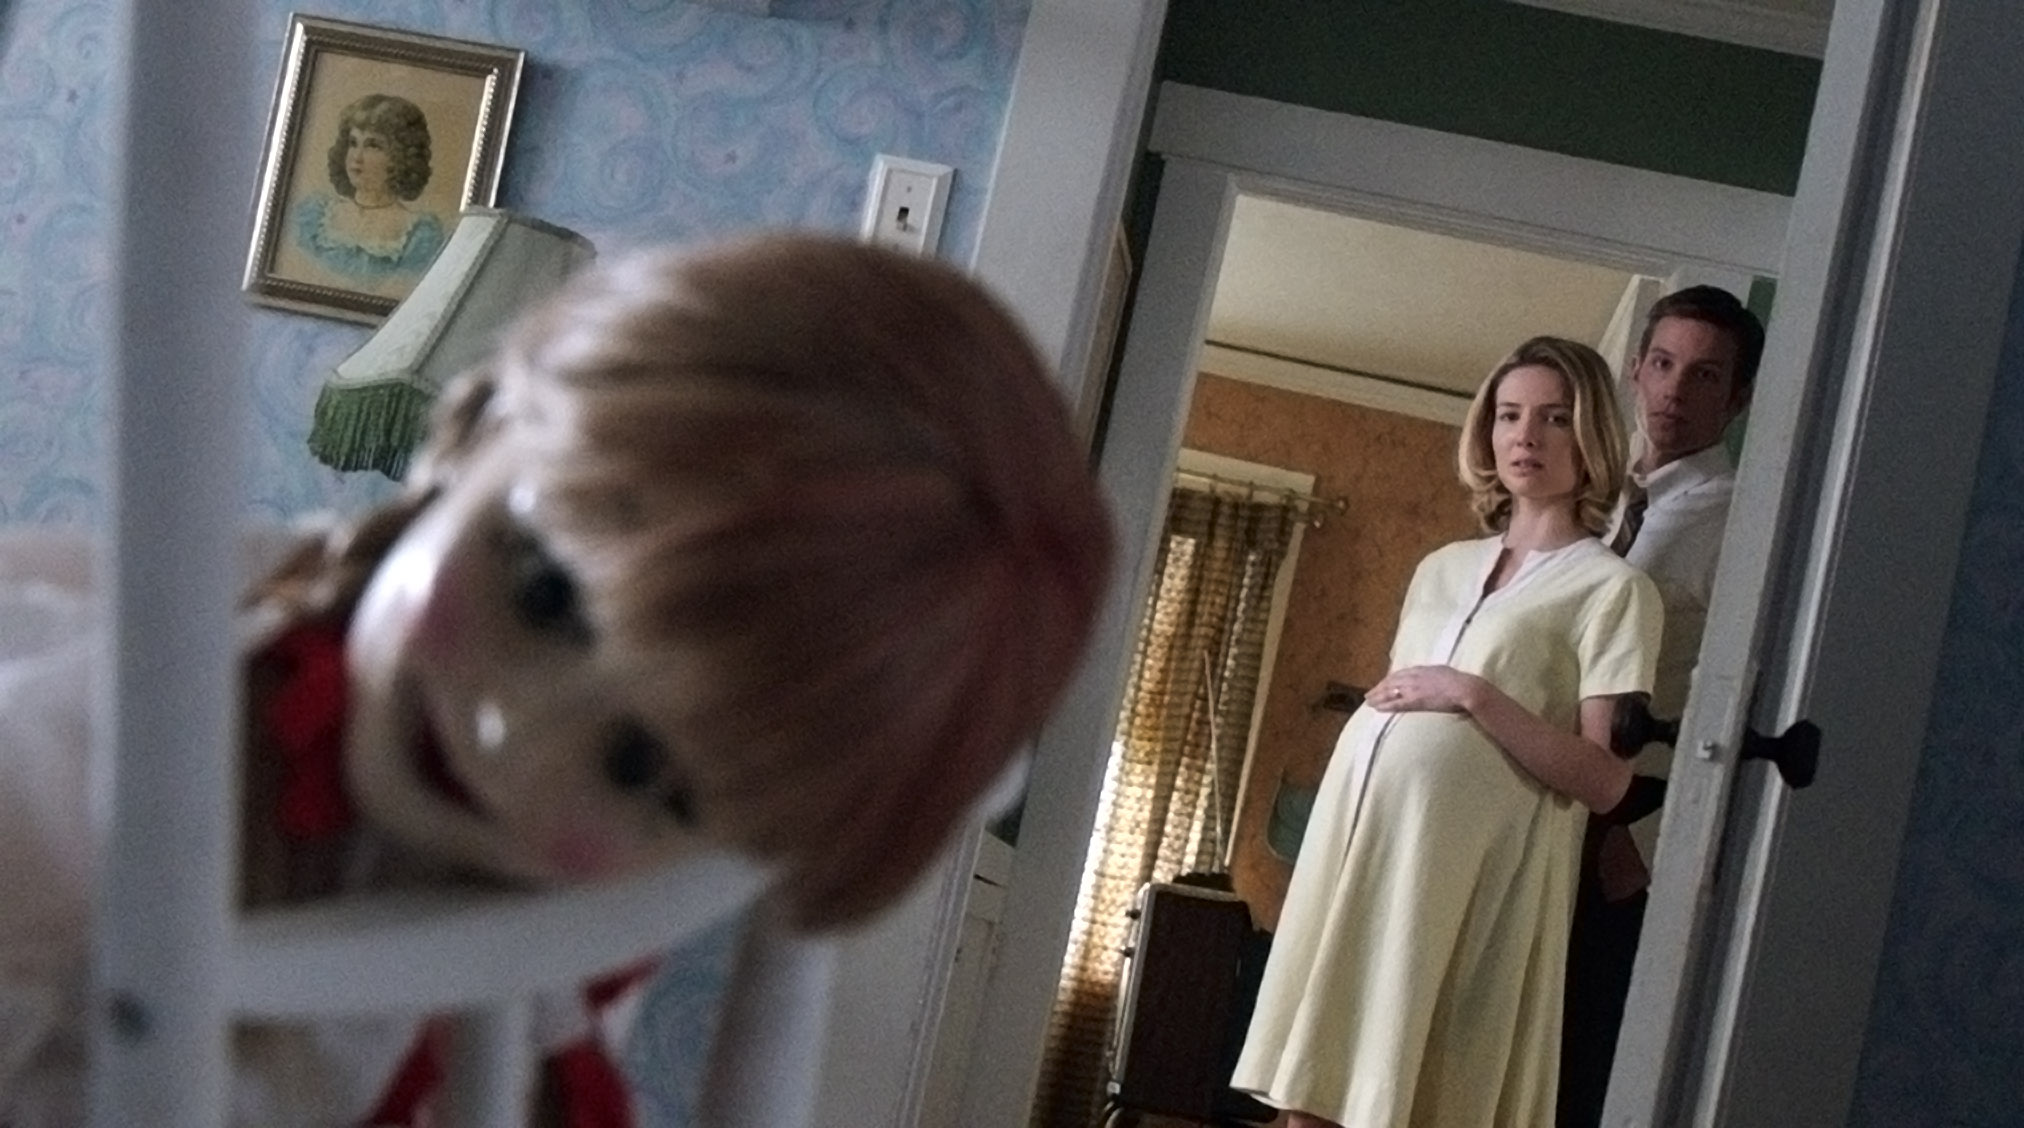 Third 'Annabelle' Film the Next In 'Conjuring' Universe - Bloody Disgusting